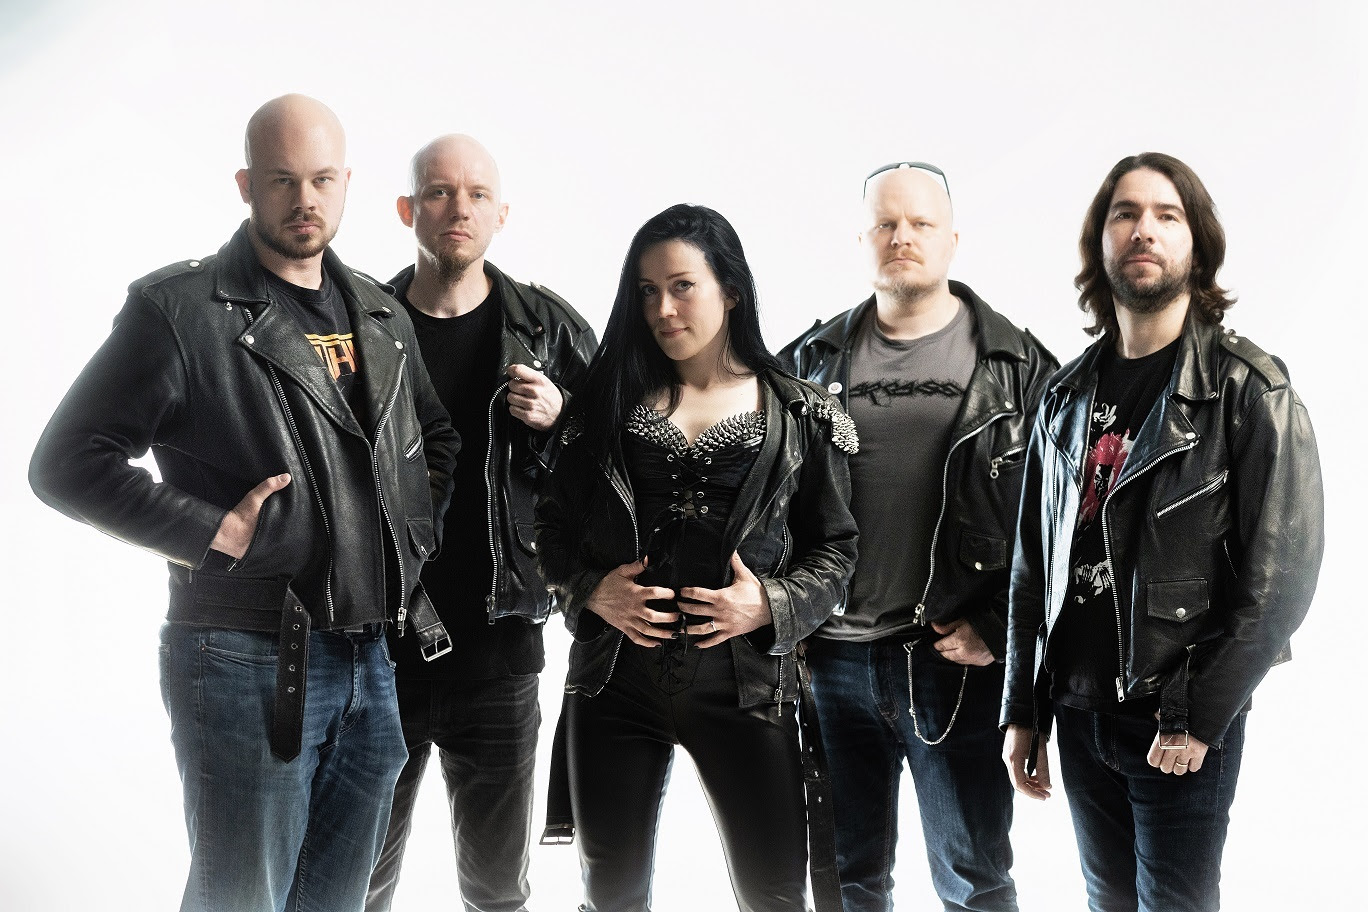 You are currently viewing Finnish Heavy Metal act RATBREED release music video for new single “Master Of Deception”.